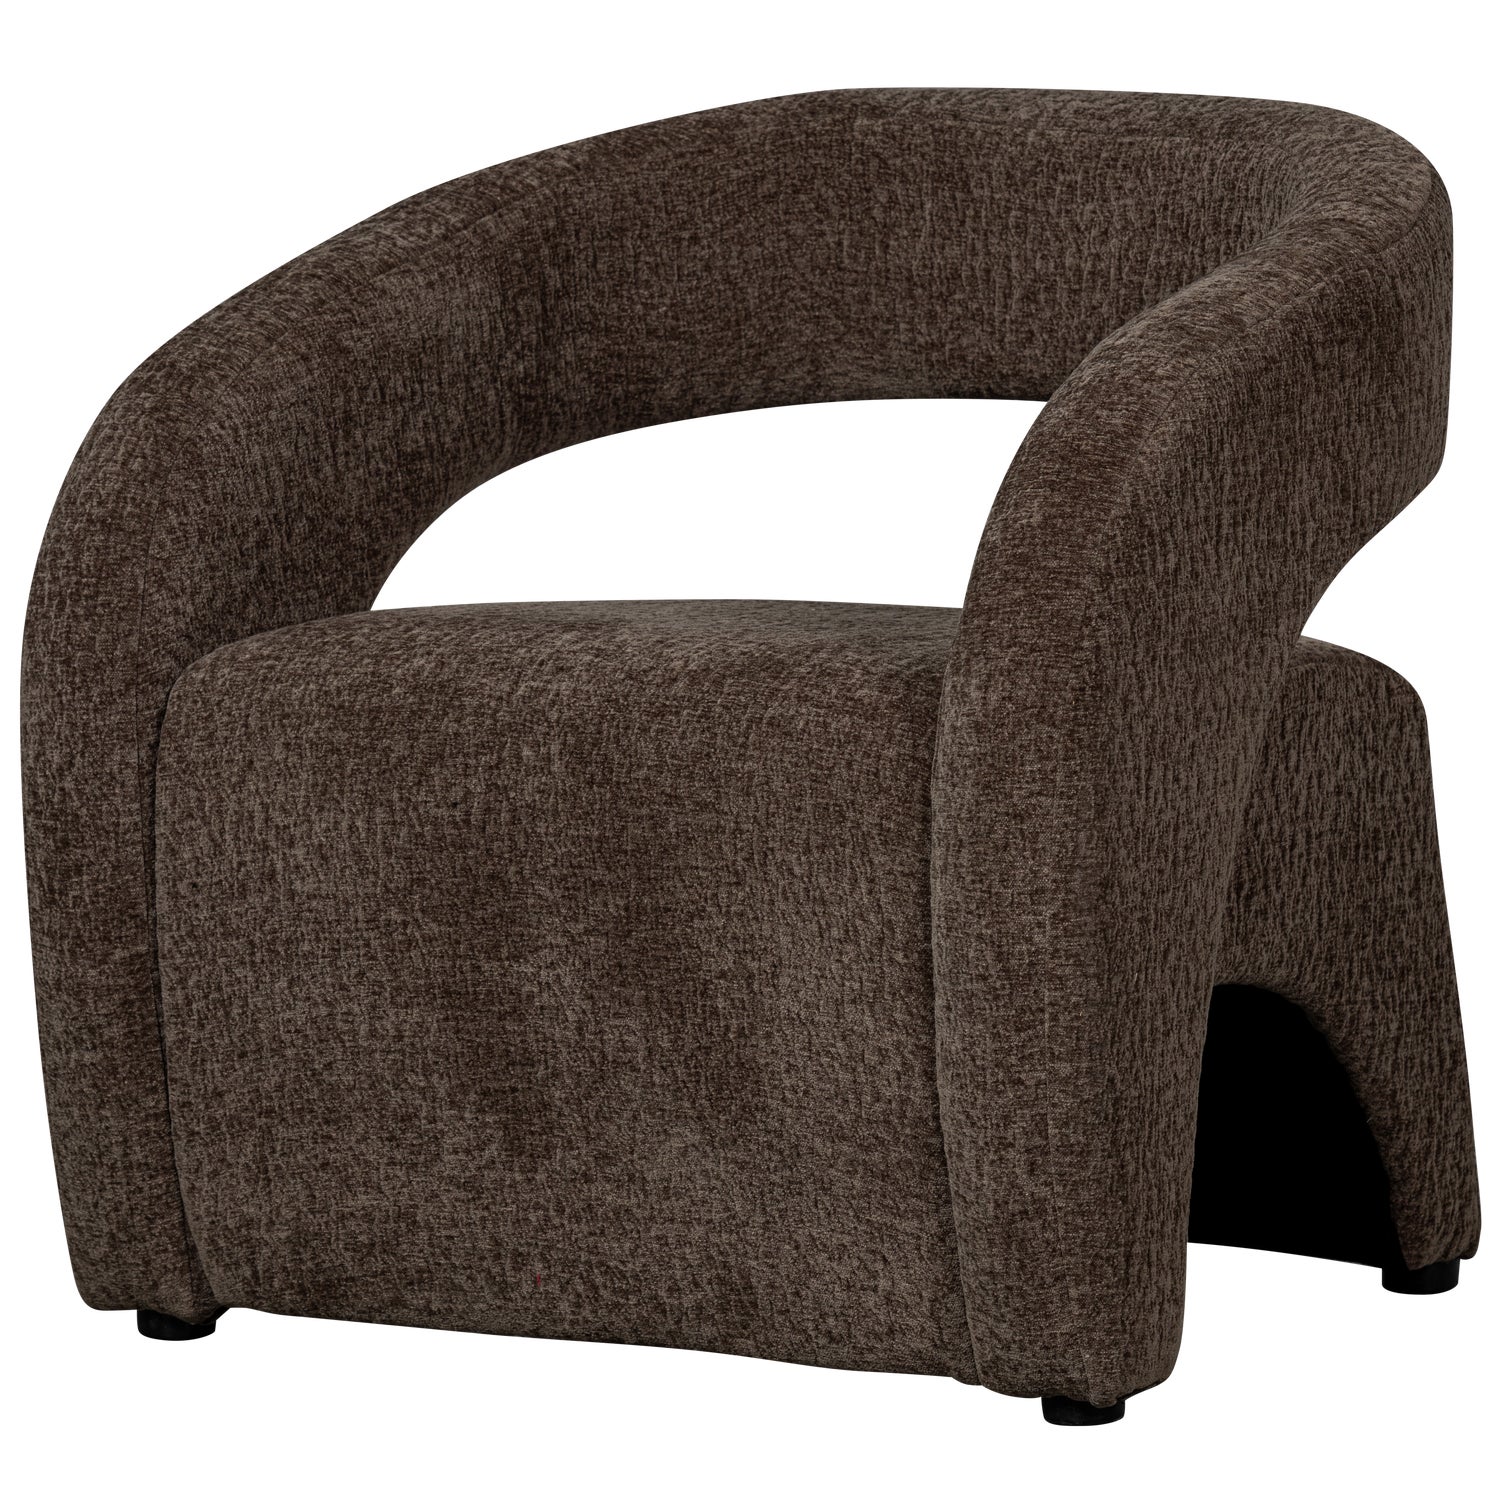 801432-E-02_VS_BP_Radiate_fauteuil_textured_espresso_SA.png?auto=webp&format=png&width=1500&height=1500